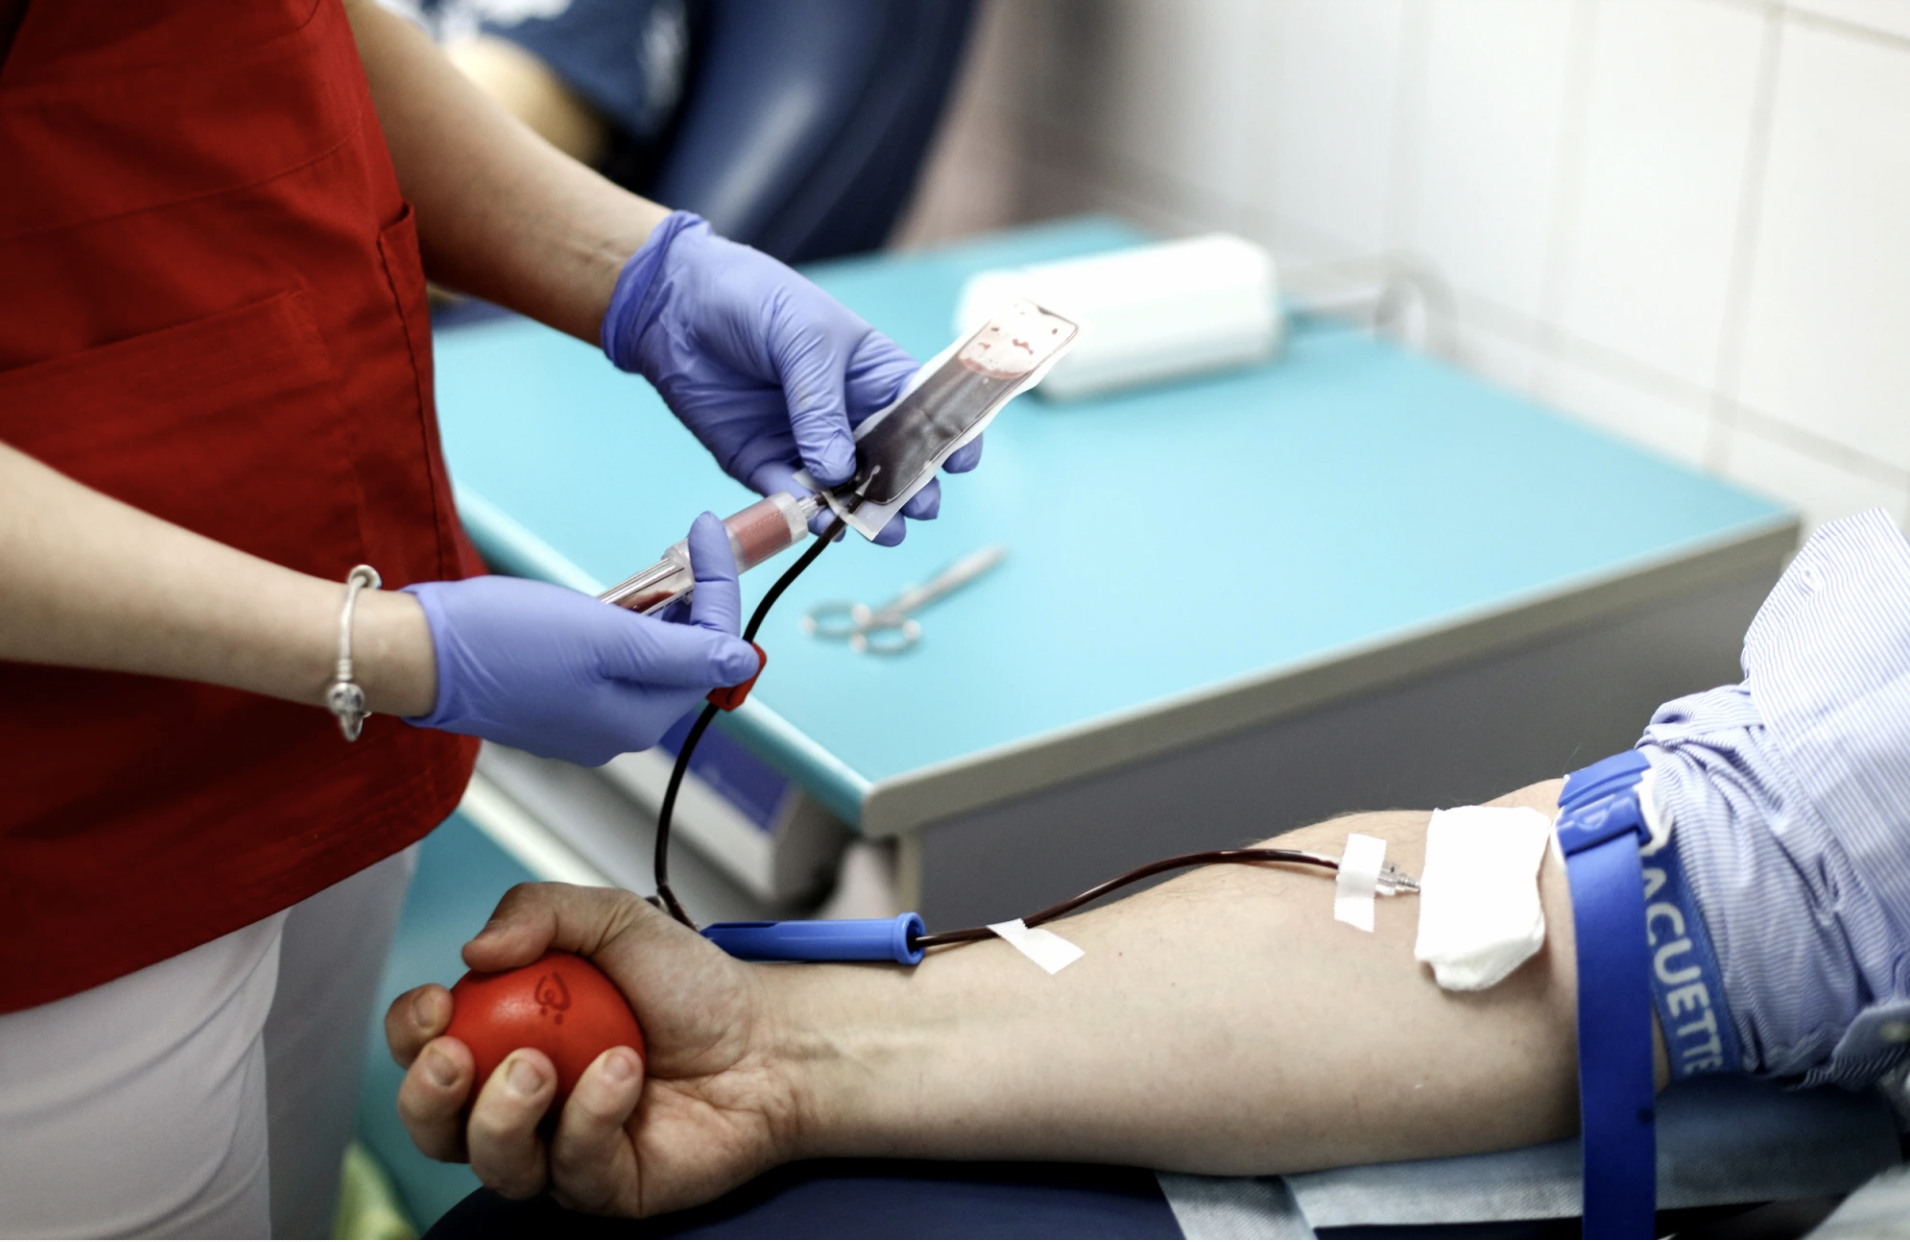 Ryan Sutherland, MPH, investigates restrictions on blood donation for men who have sex with men